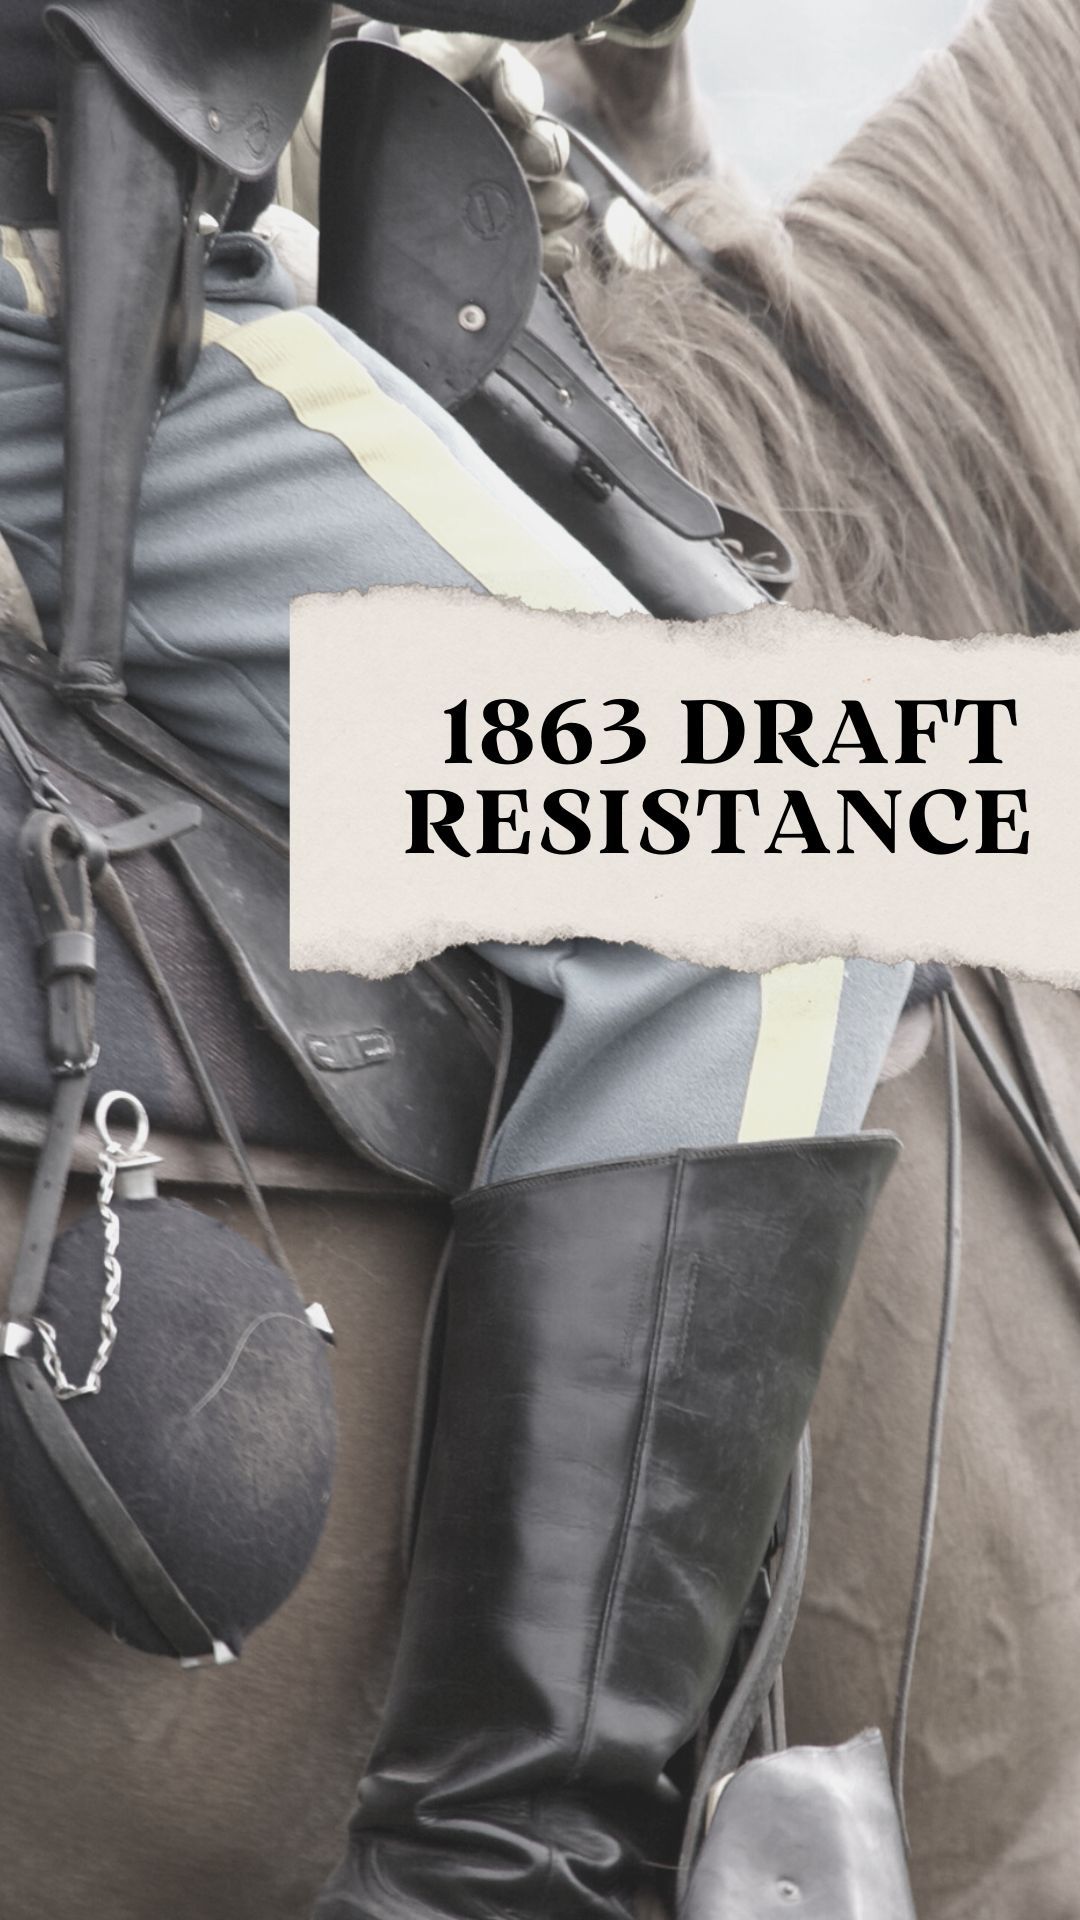 Resistance to the Draft of 1863